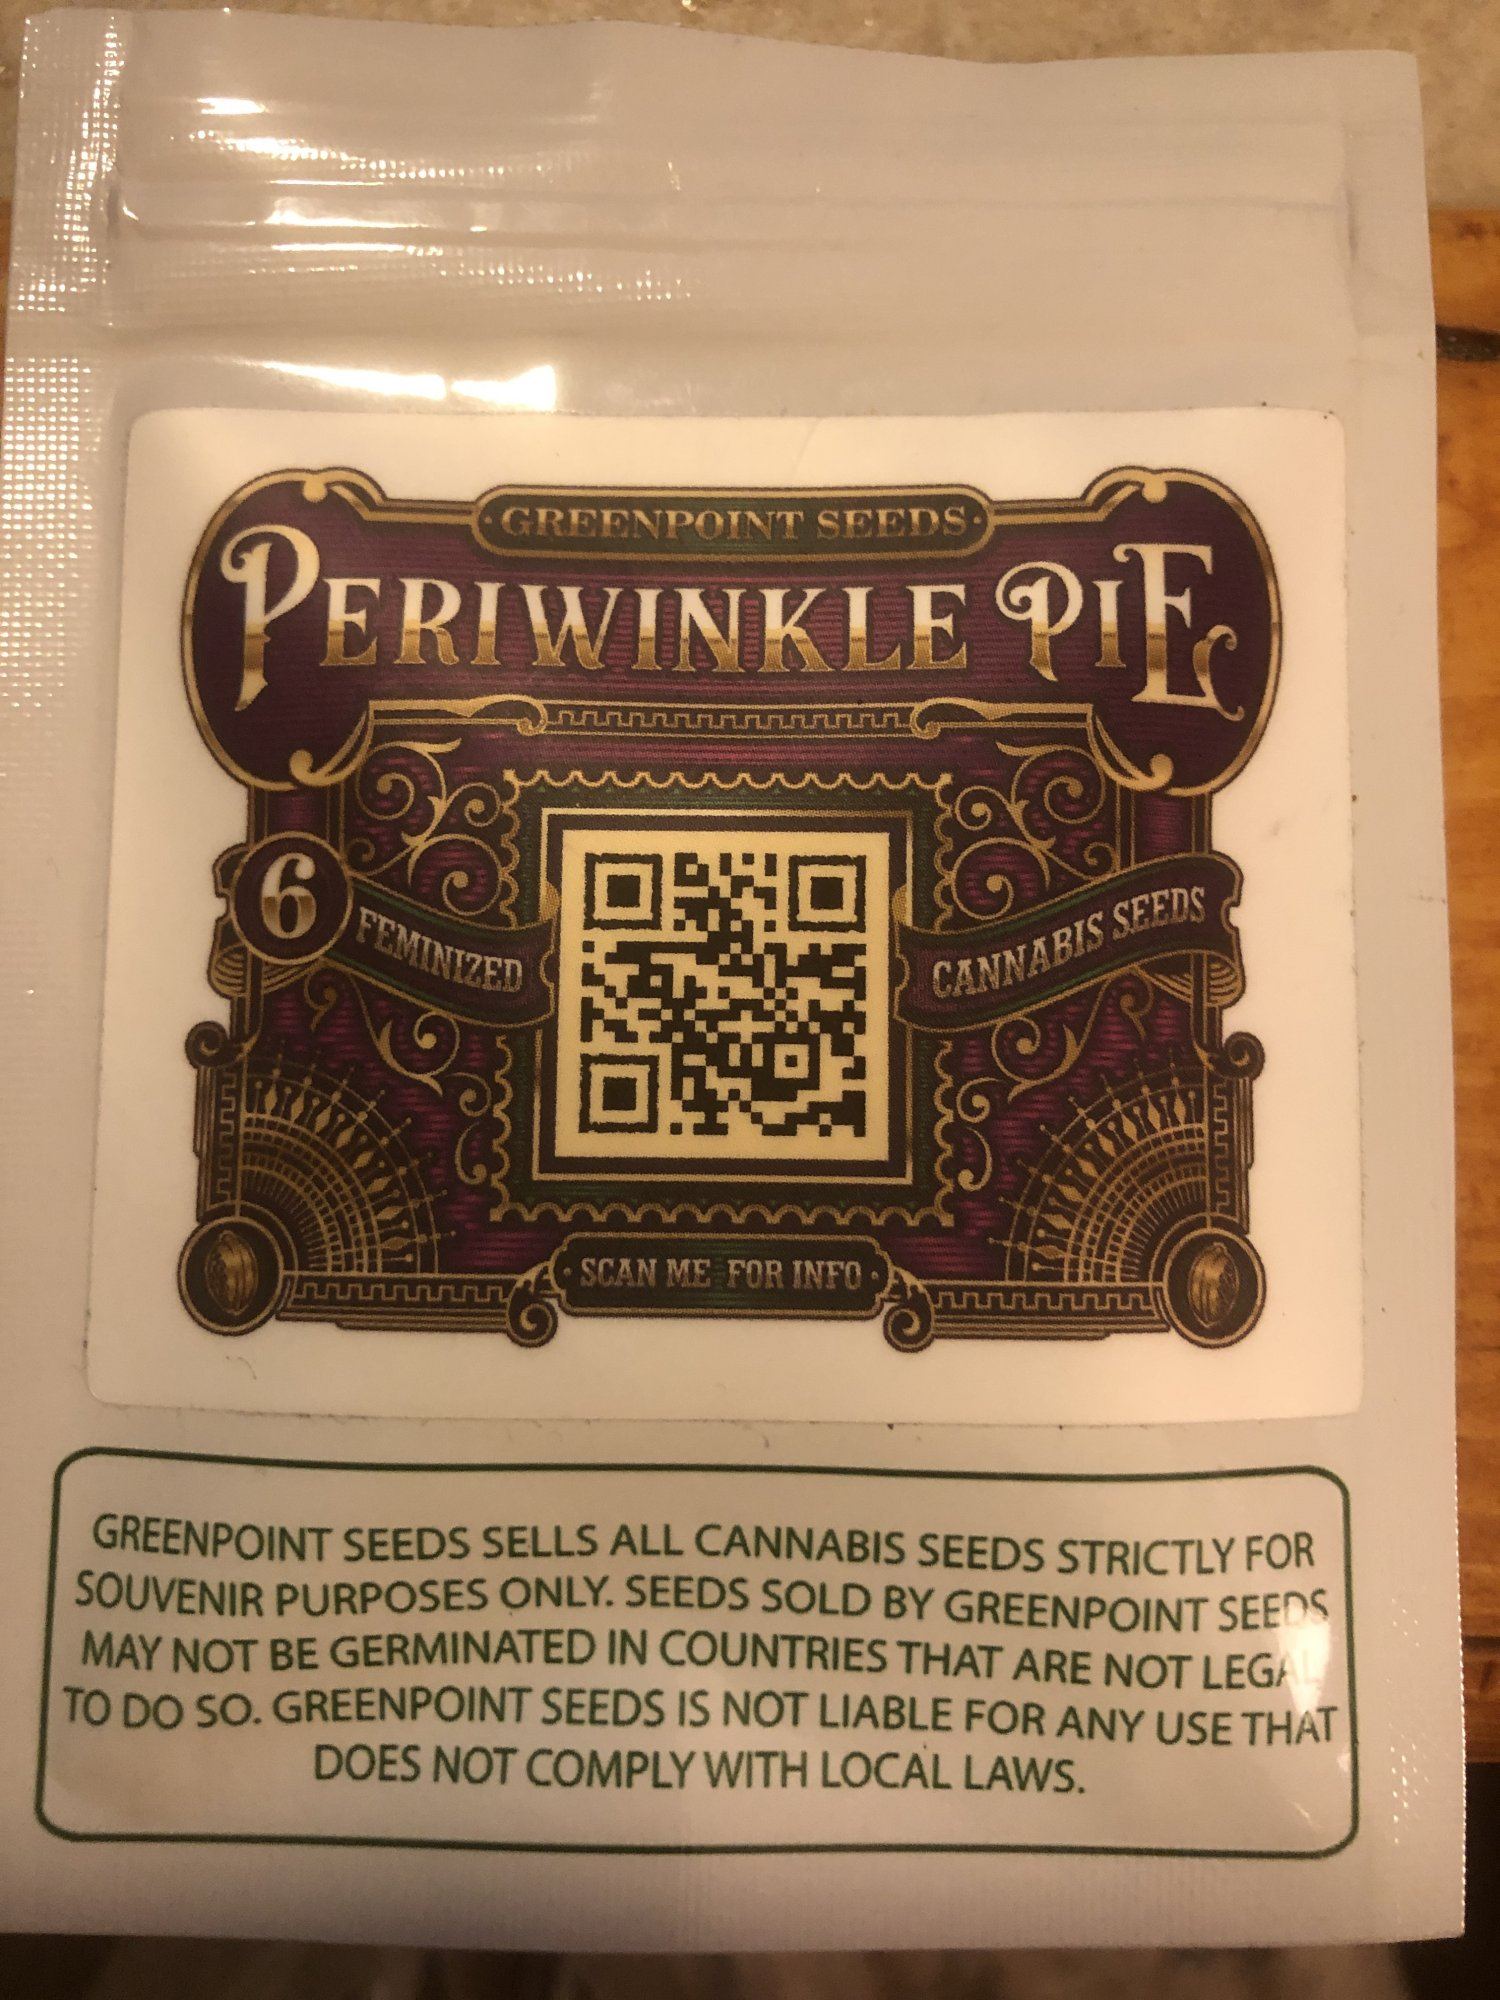 Periwinkle pie   greenpoint seeds 3